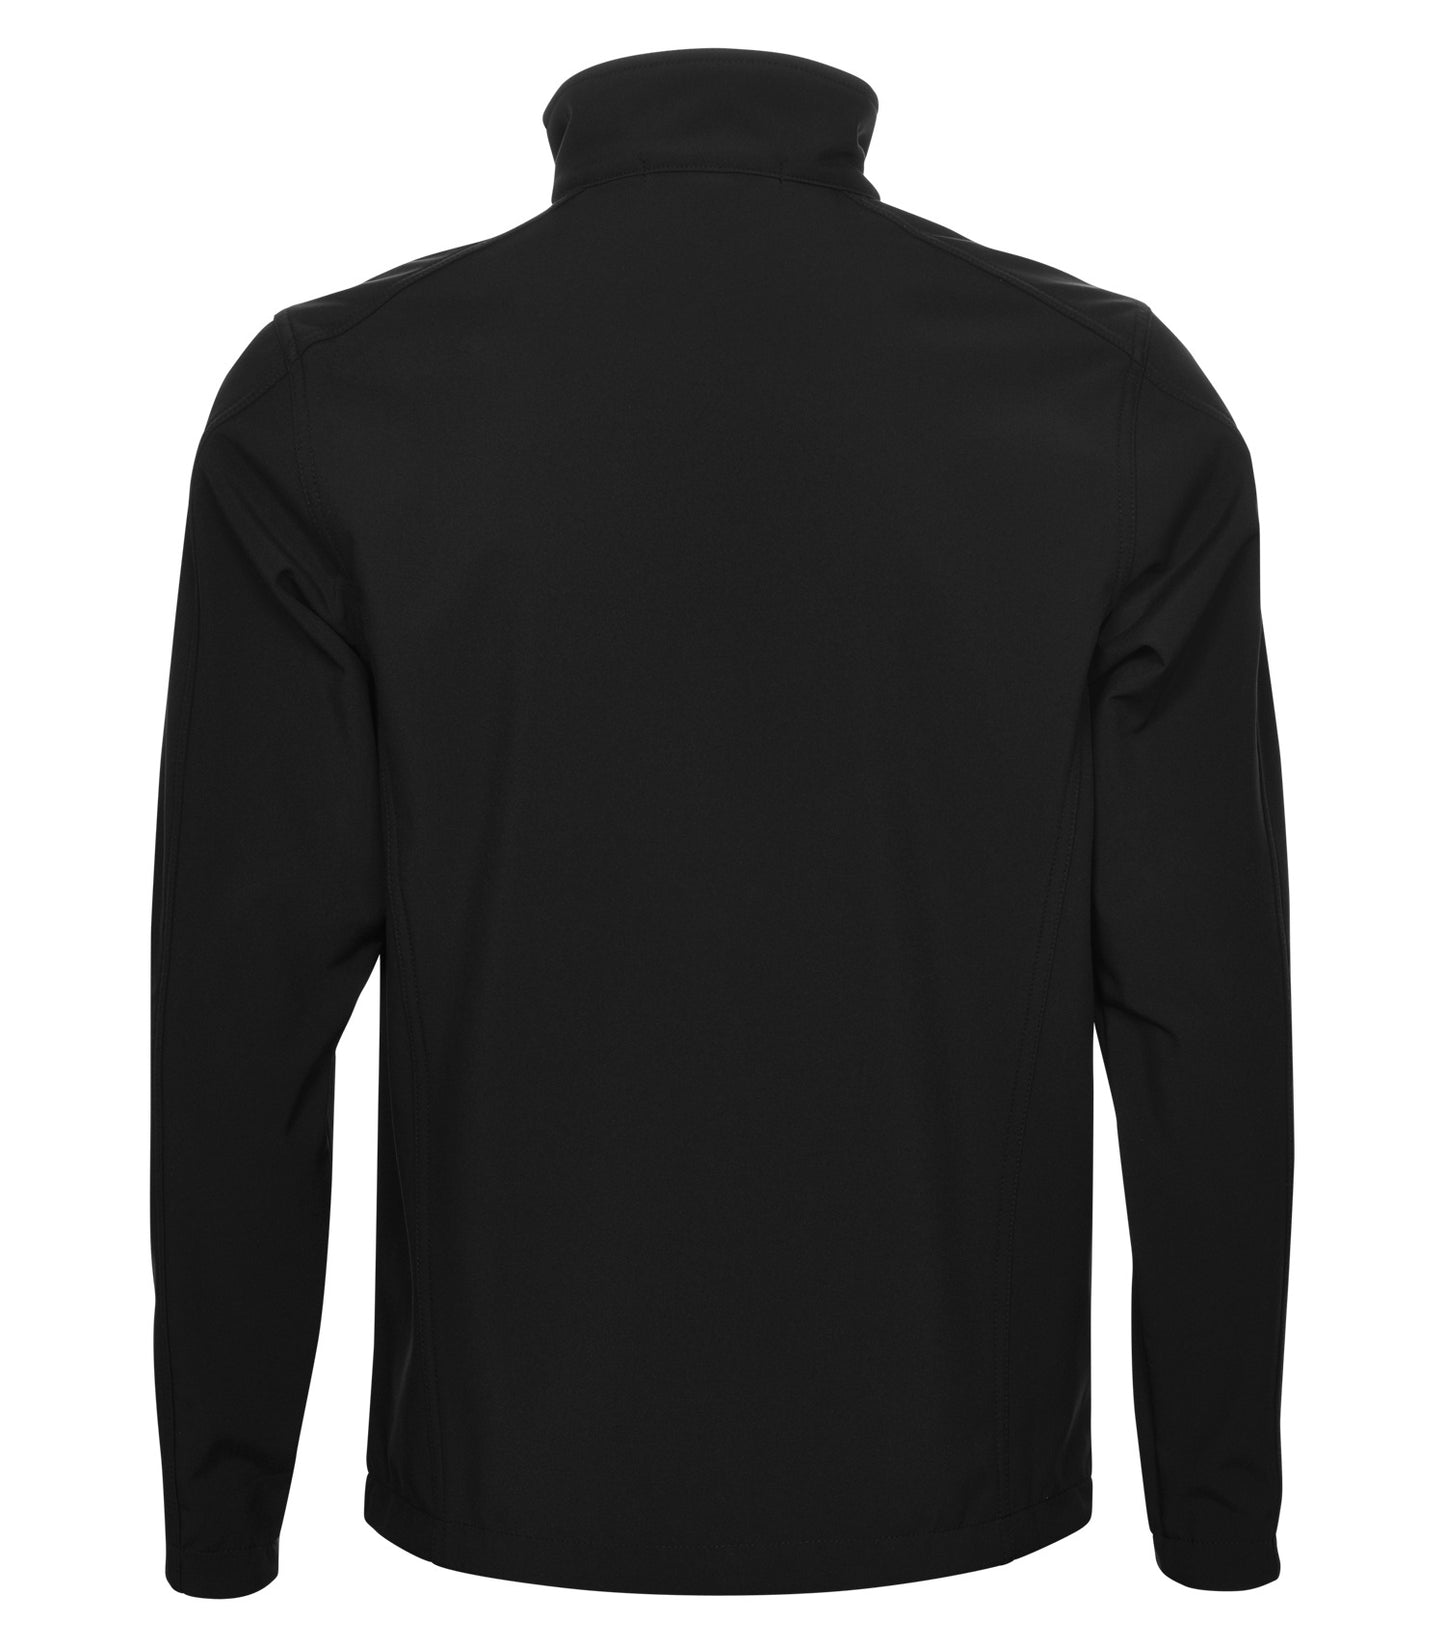 COAL HARBOUR® Everyday Soft Shell Jacket - Men's